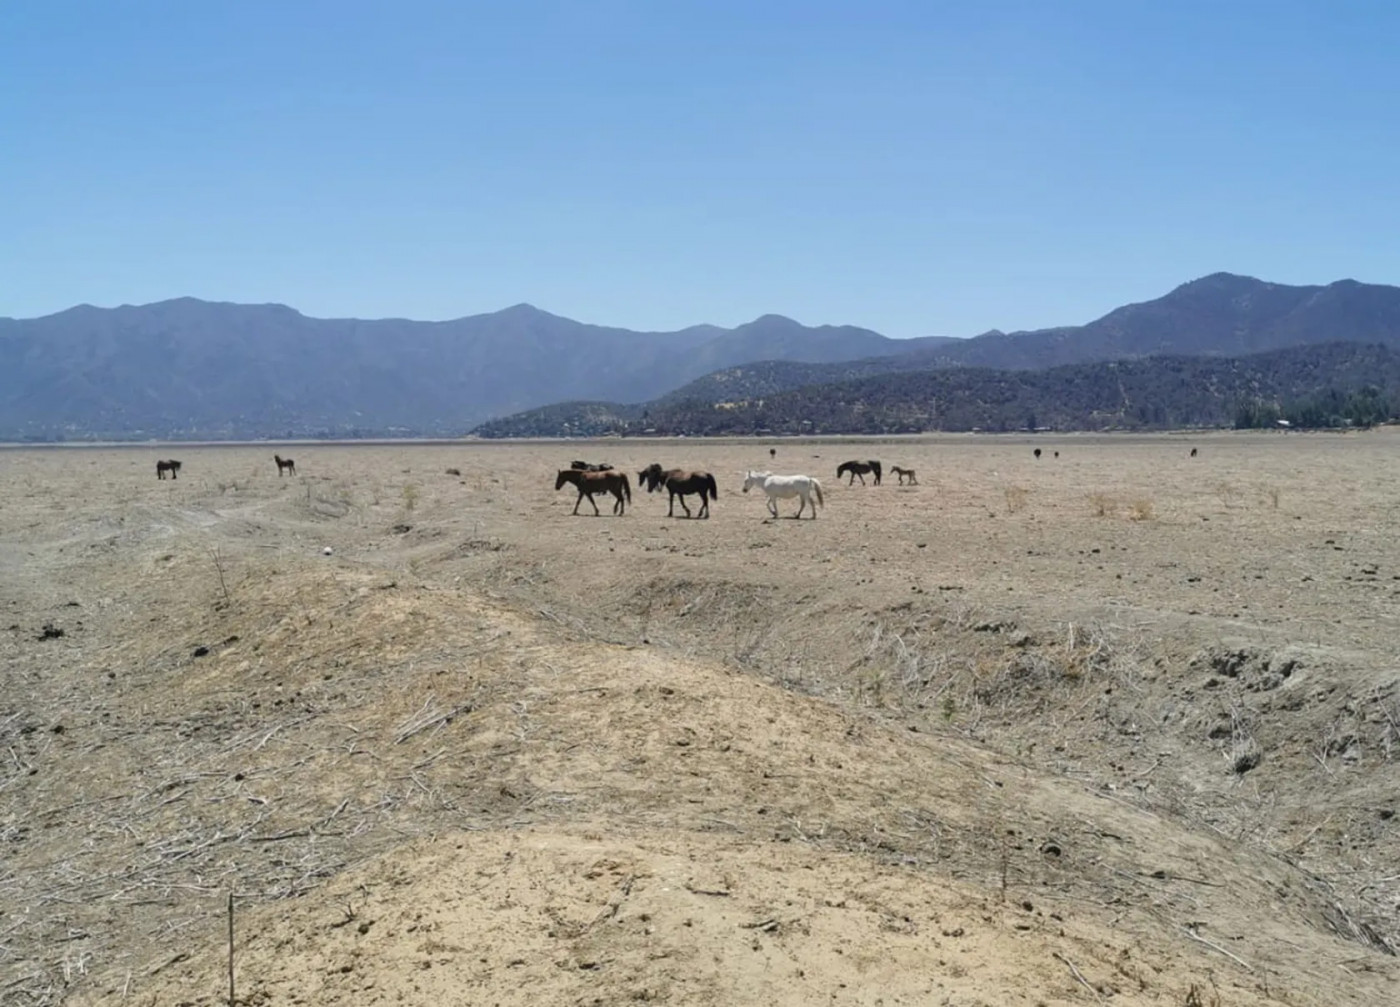 Horses graze on the former Lake Aculeo southwest of Santiago, Chile, in January 2021. The lake completely dried up in May 2018 due to drought, overpumping of groundwater, rapid population growth and agricultural as well as urban diversions. It serves as a cautionary tale for the dwindling Great Salt Lake.Will Munger